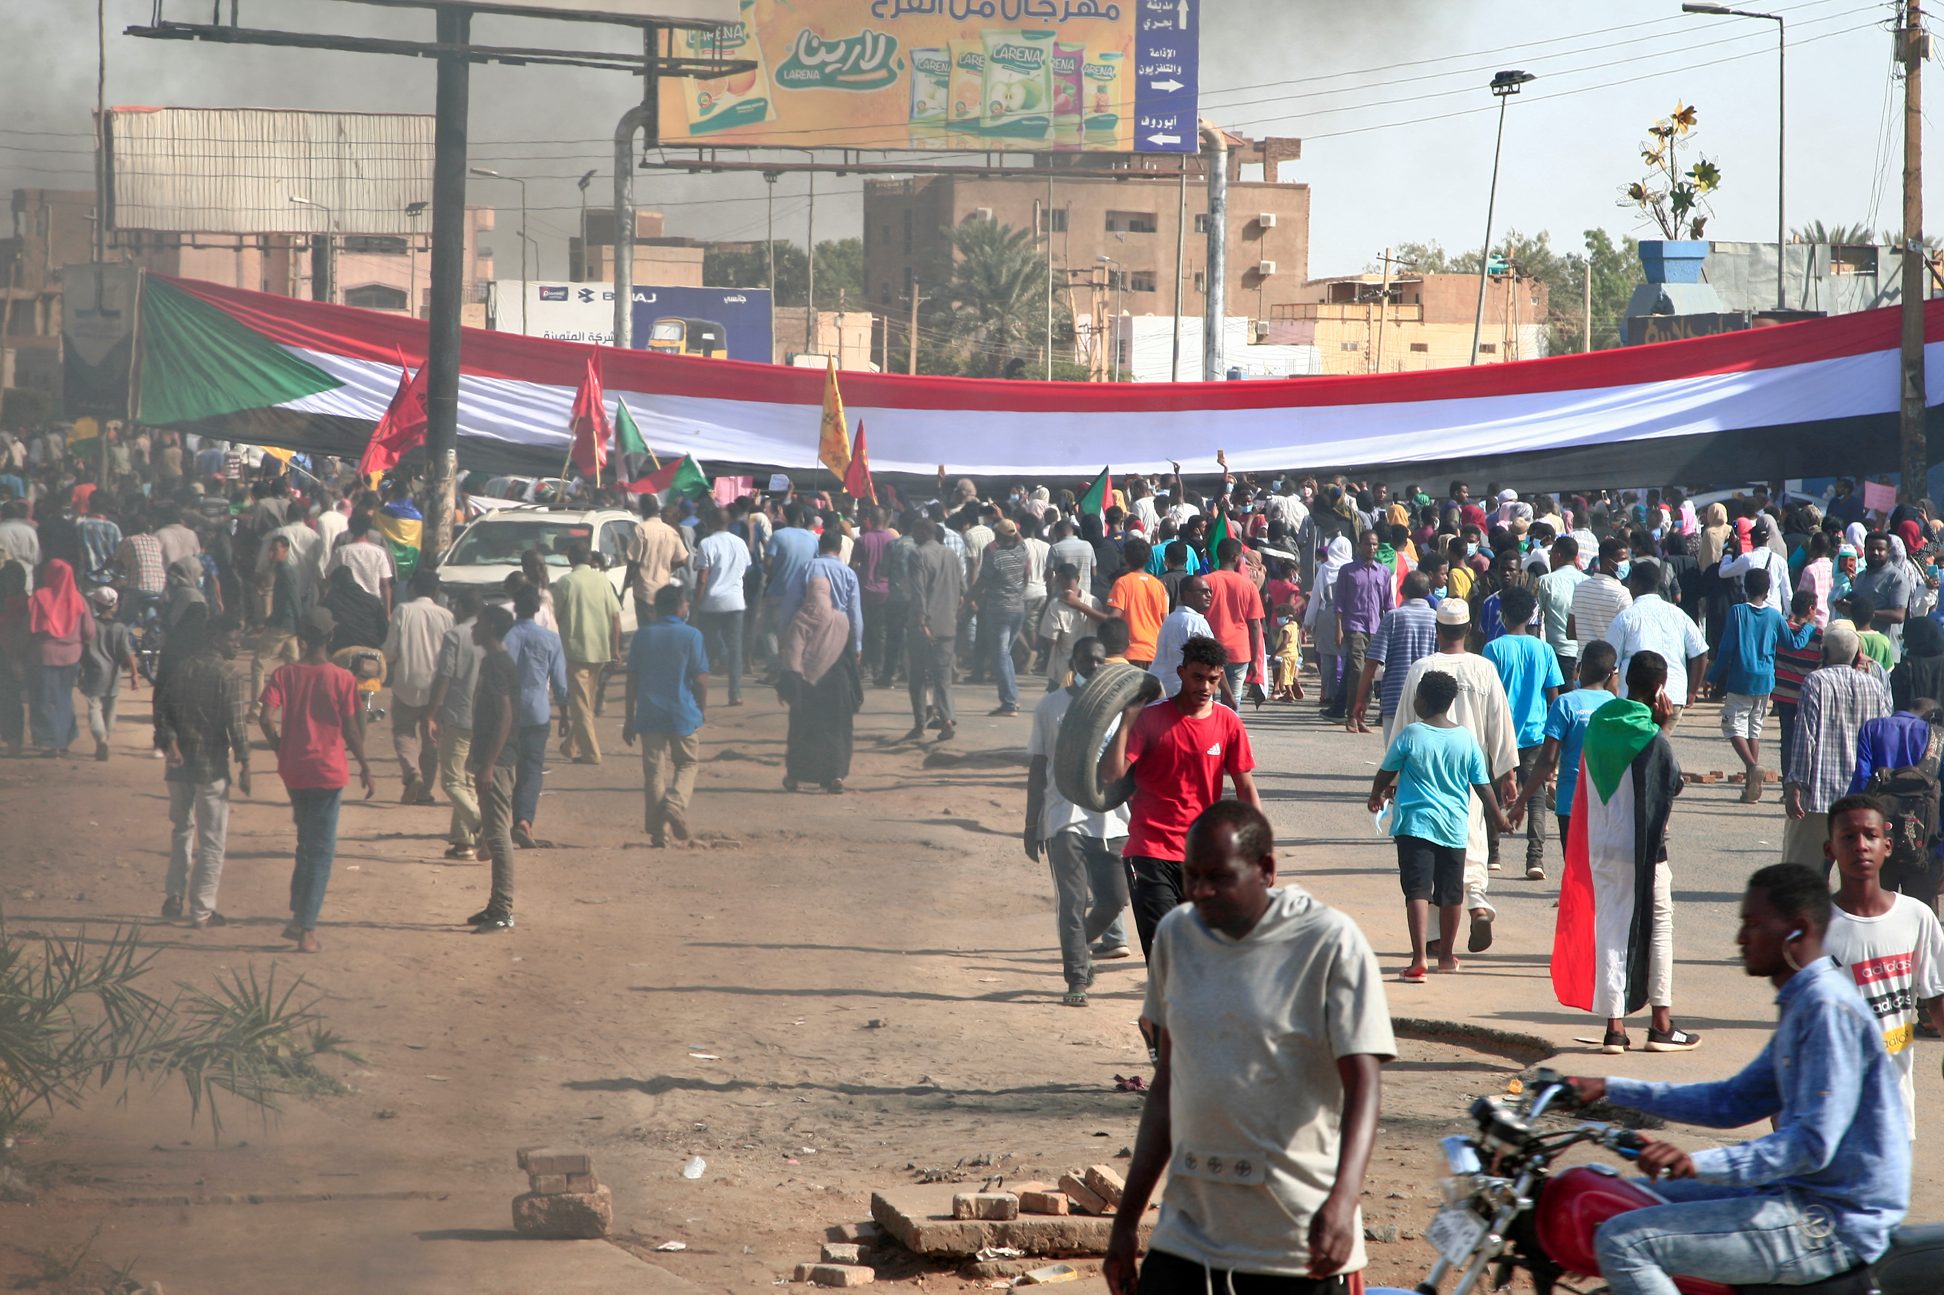 Sudanese police fire tear gas to disperse protesters